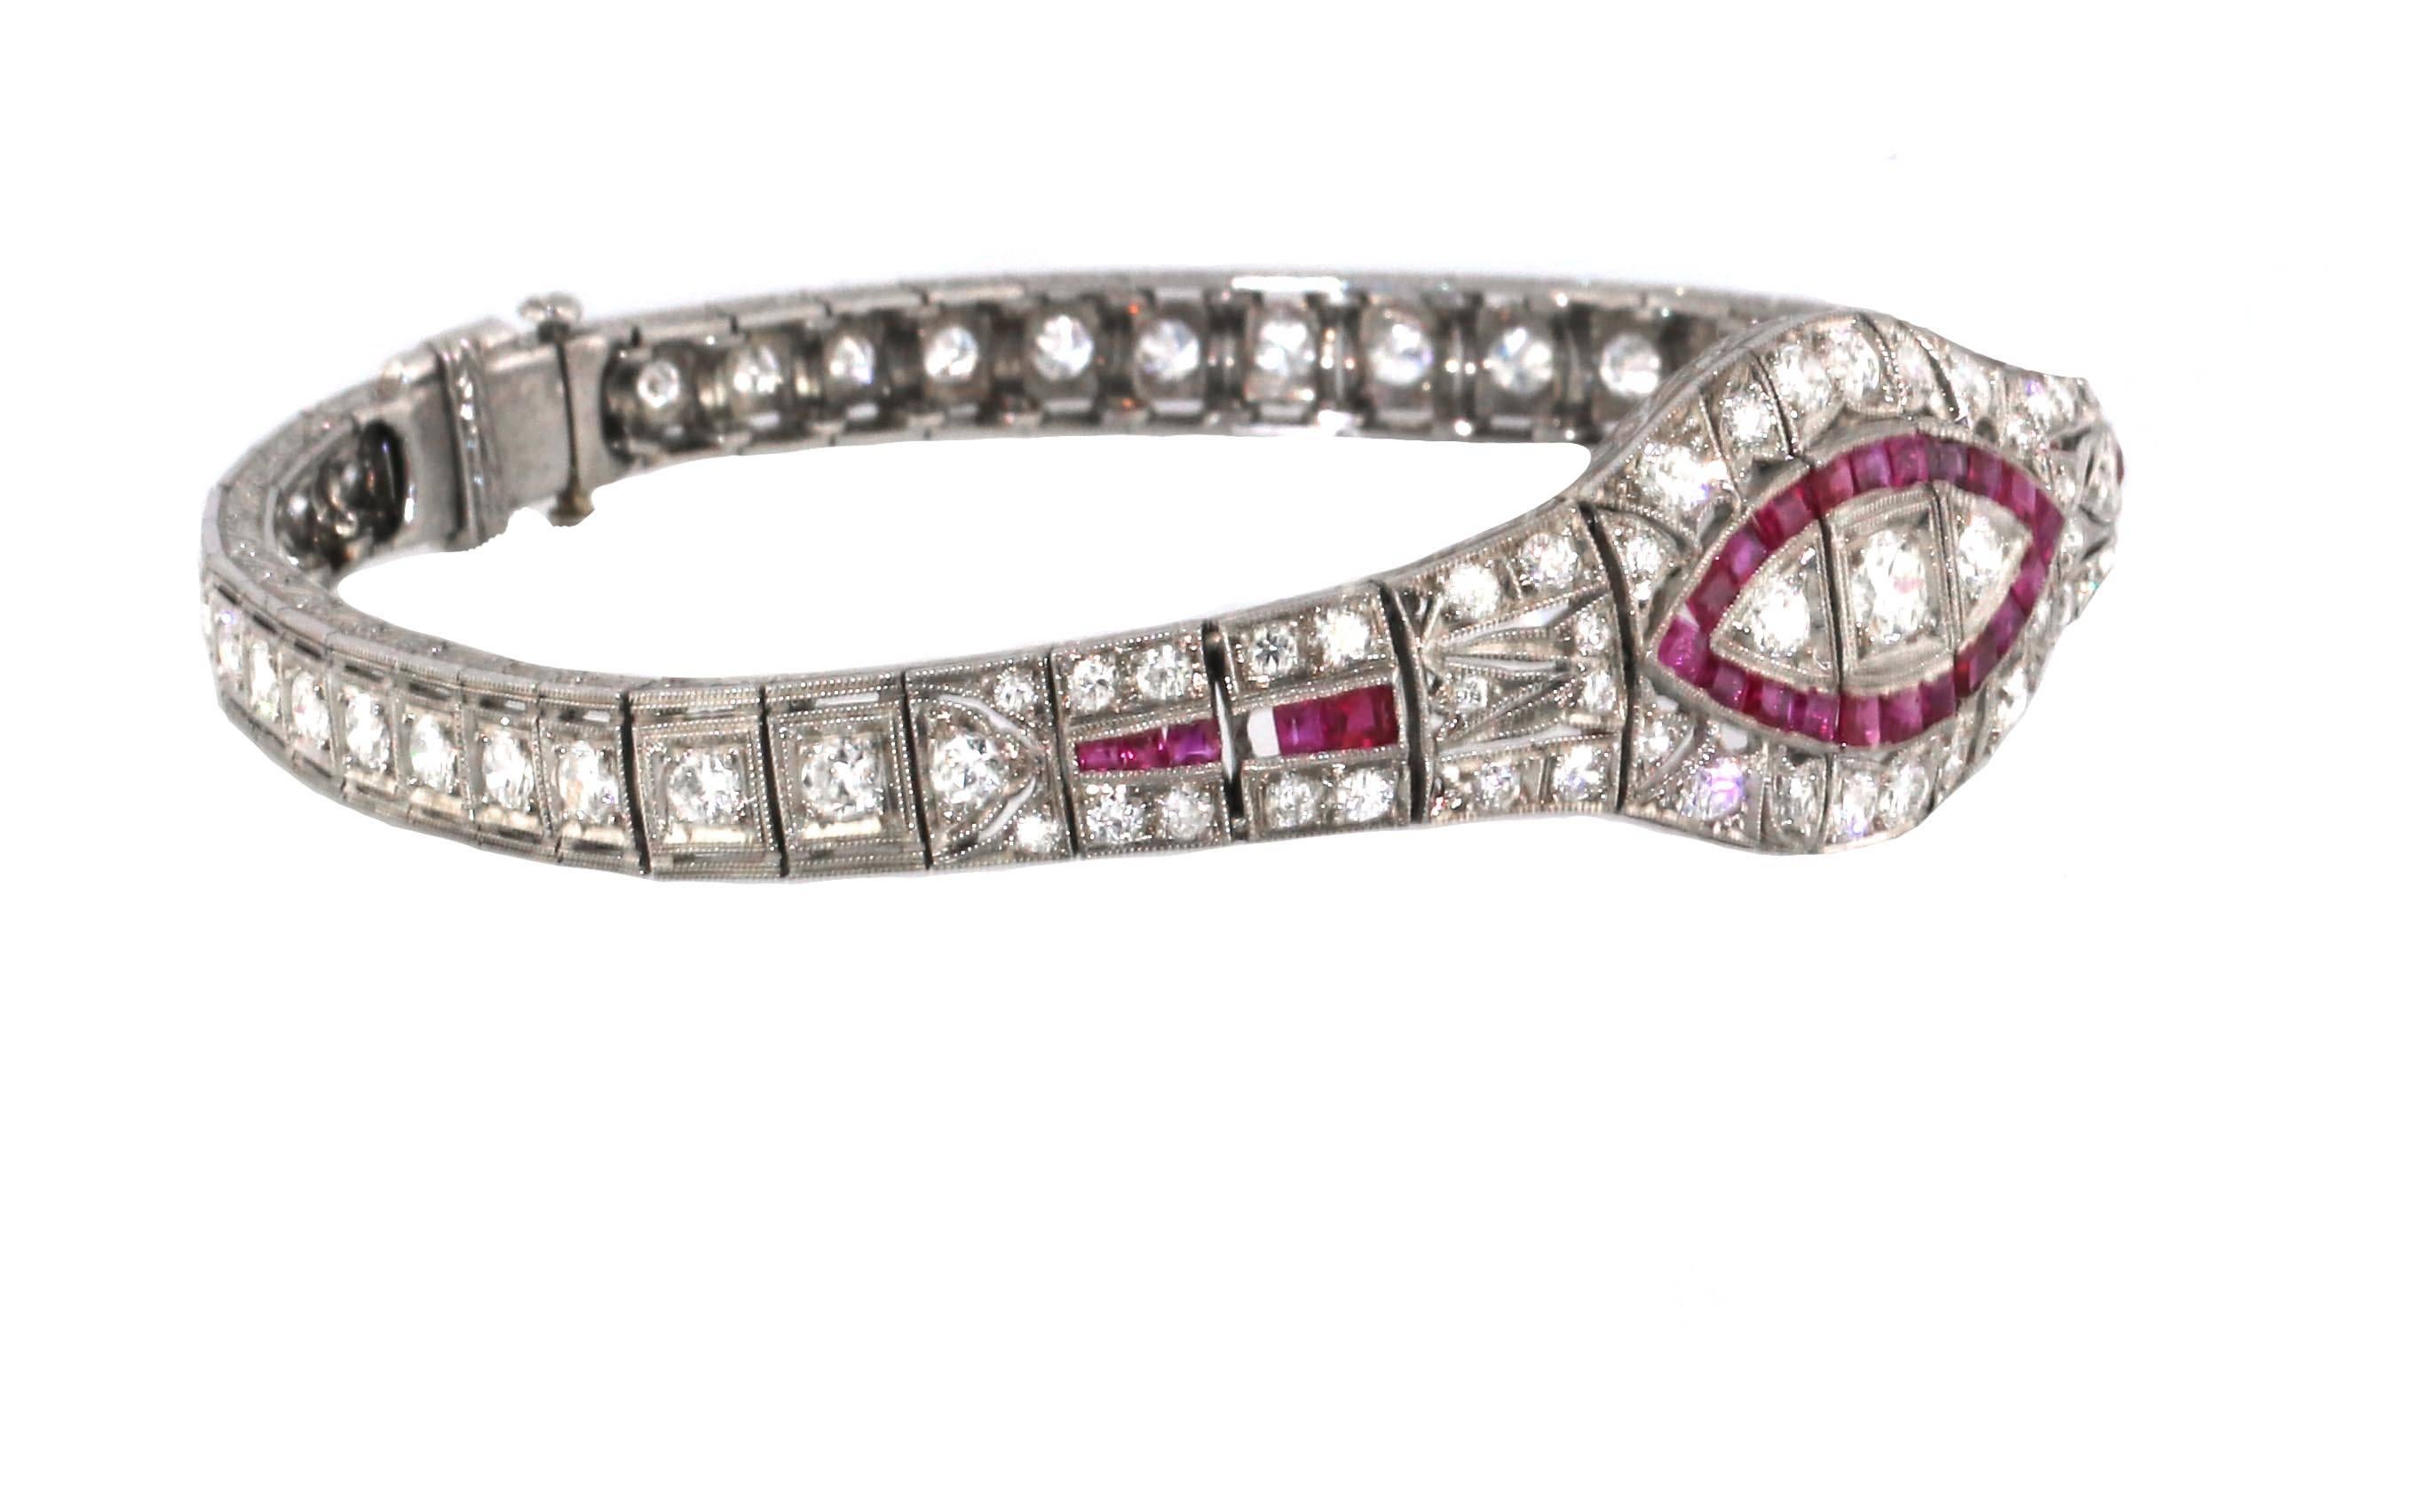 This is true Art Deco beauty. An original 1920's ruby and diamond bracelet. This is the ideal flapper piece of jewelry that cannot be replicated. The craftsmanship of the 1920's is what allows the bracelet to look as good as it does nearly 100 years